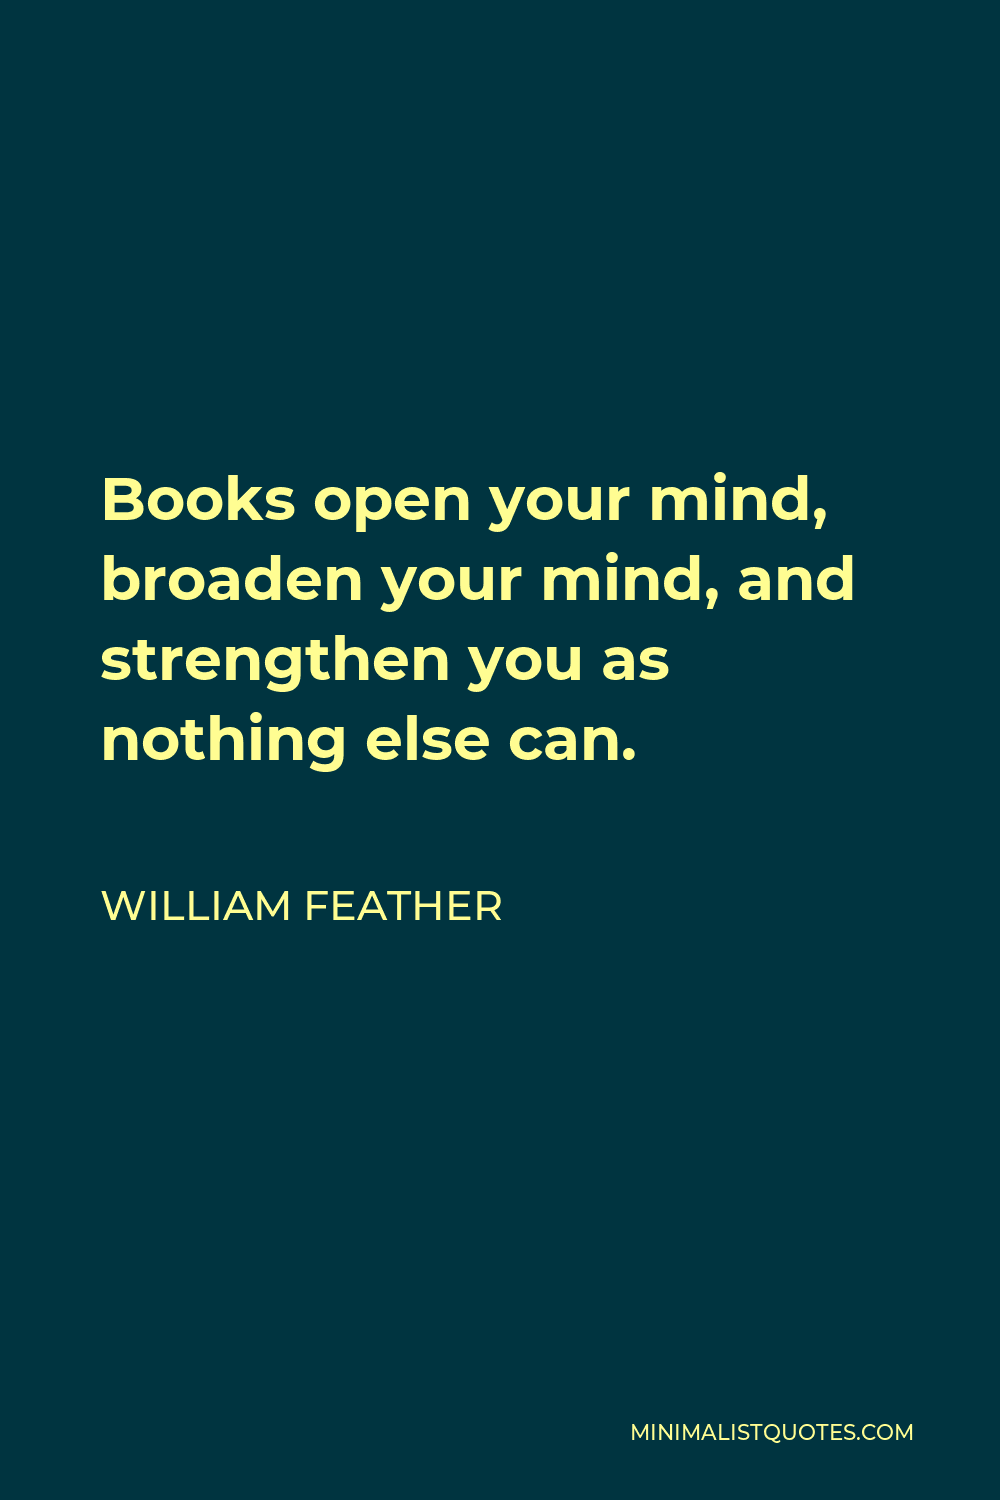 William Feather Quote - Books open your mind, broaden your mind, and strengthen you as nothing else can.